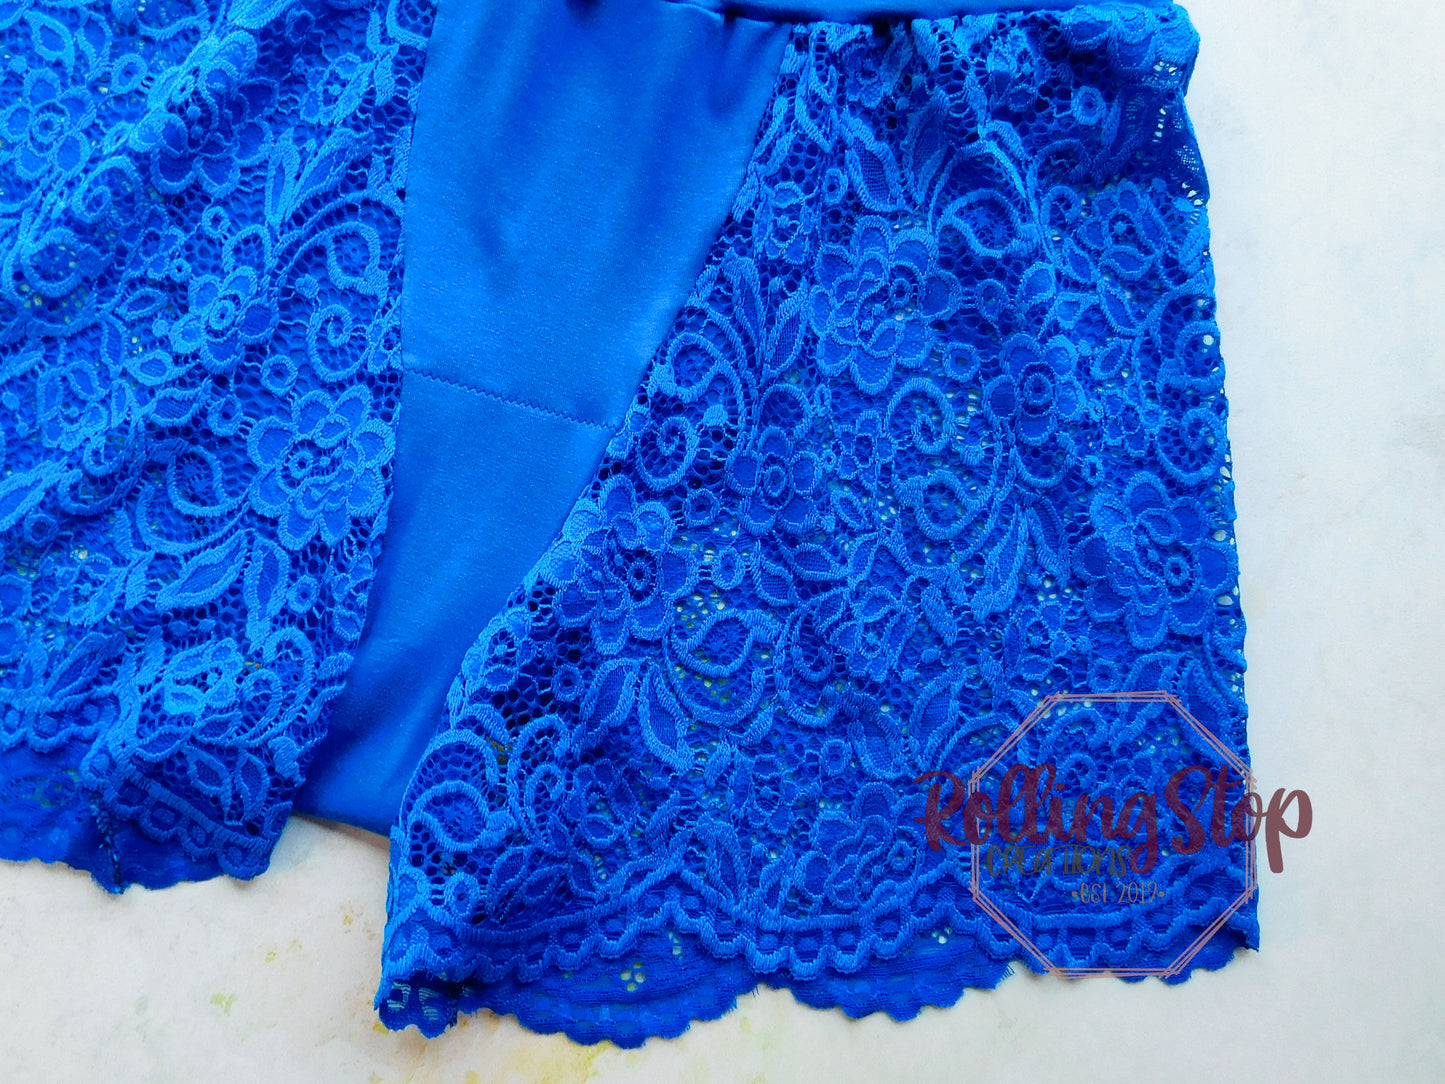 Sonnet Lace Boxers by Rolling Stop Creations sold by Rolling Stop Creations 